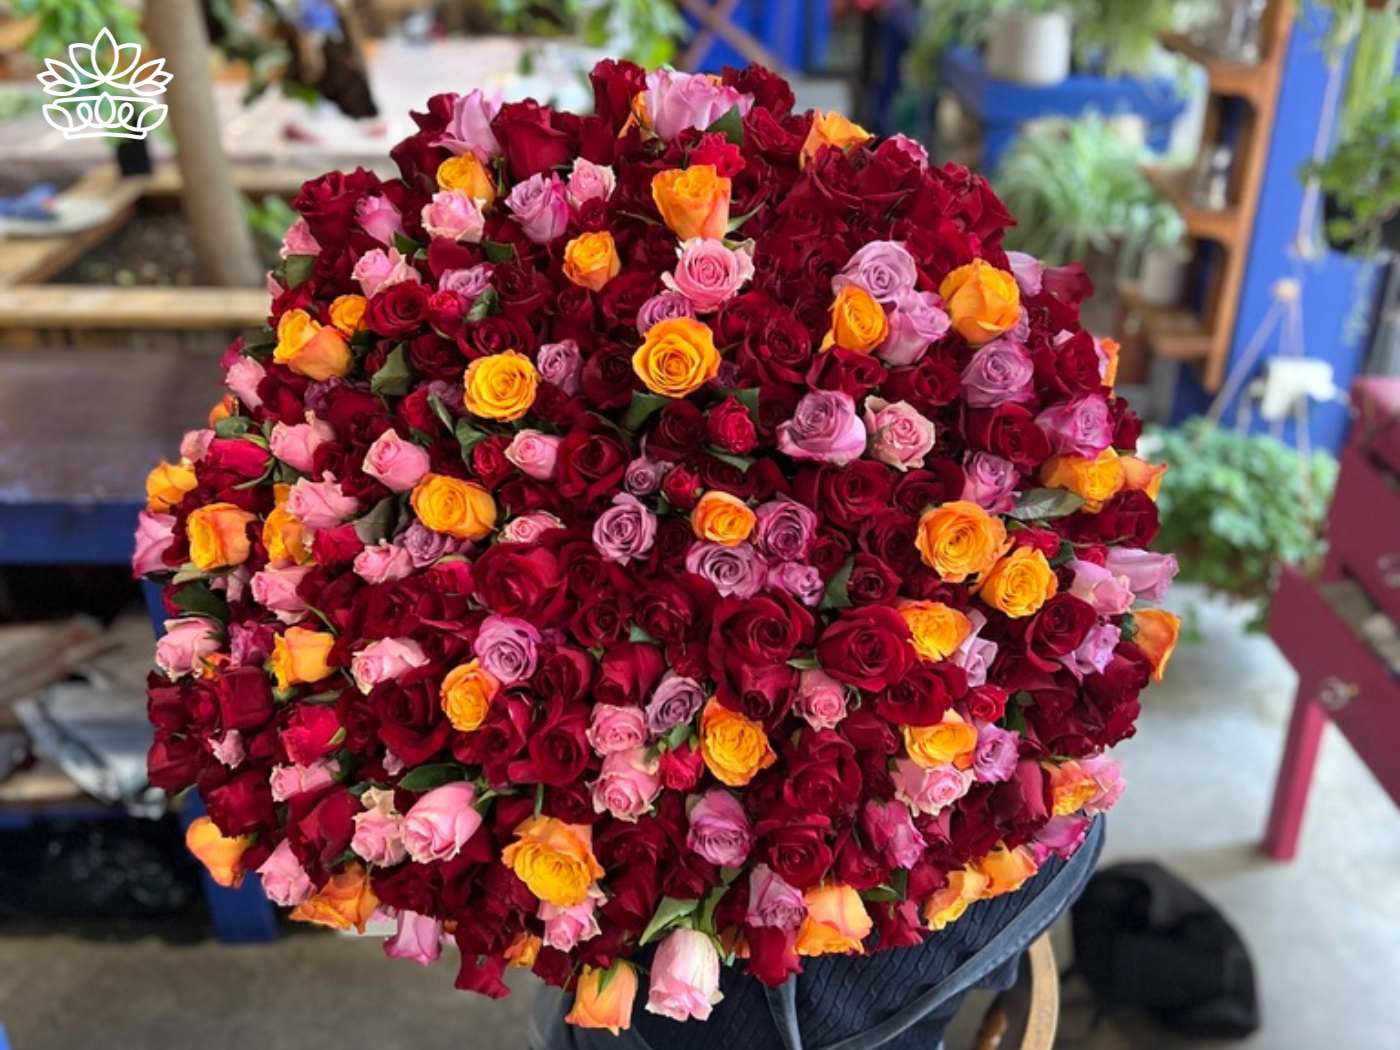 An exquisite close-up view of a large bouquet composed of tightly packed multicoloured roses ranging from deep reds to vibrant oranges and pinks, part of the Flowers By Occasion Collection at Fabulous Flowers and Gifts.